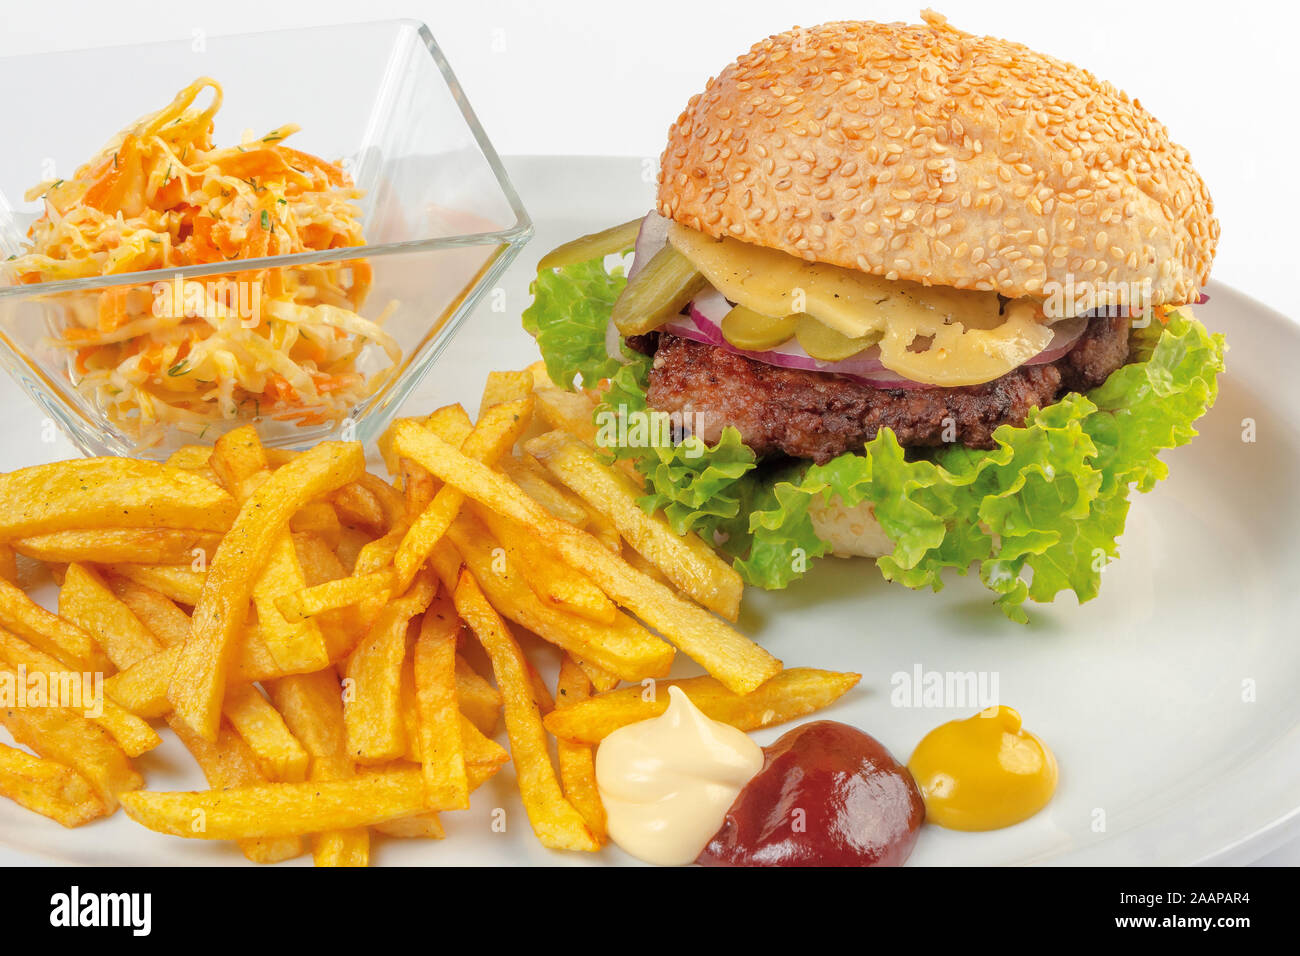 fast food menu. hamburger, french fries and salad. burger with beef stake, cheese onion and pickle. mayonnaise ketchup mustard on the white plate. hea Stock Photo